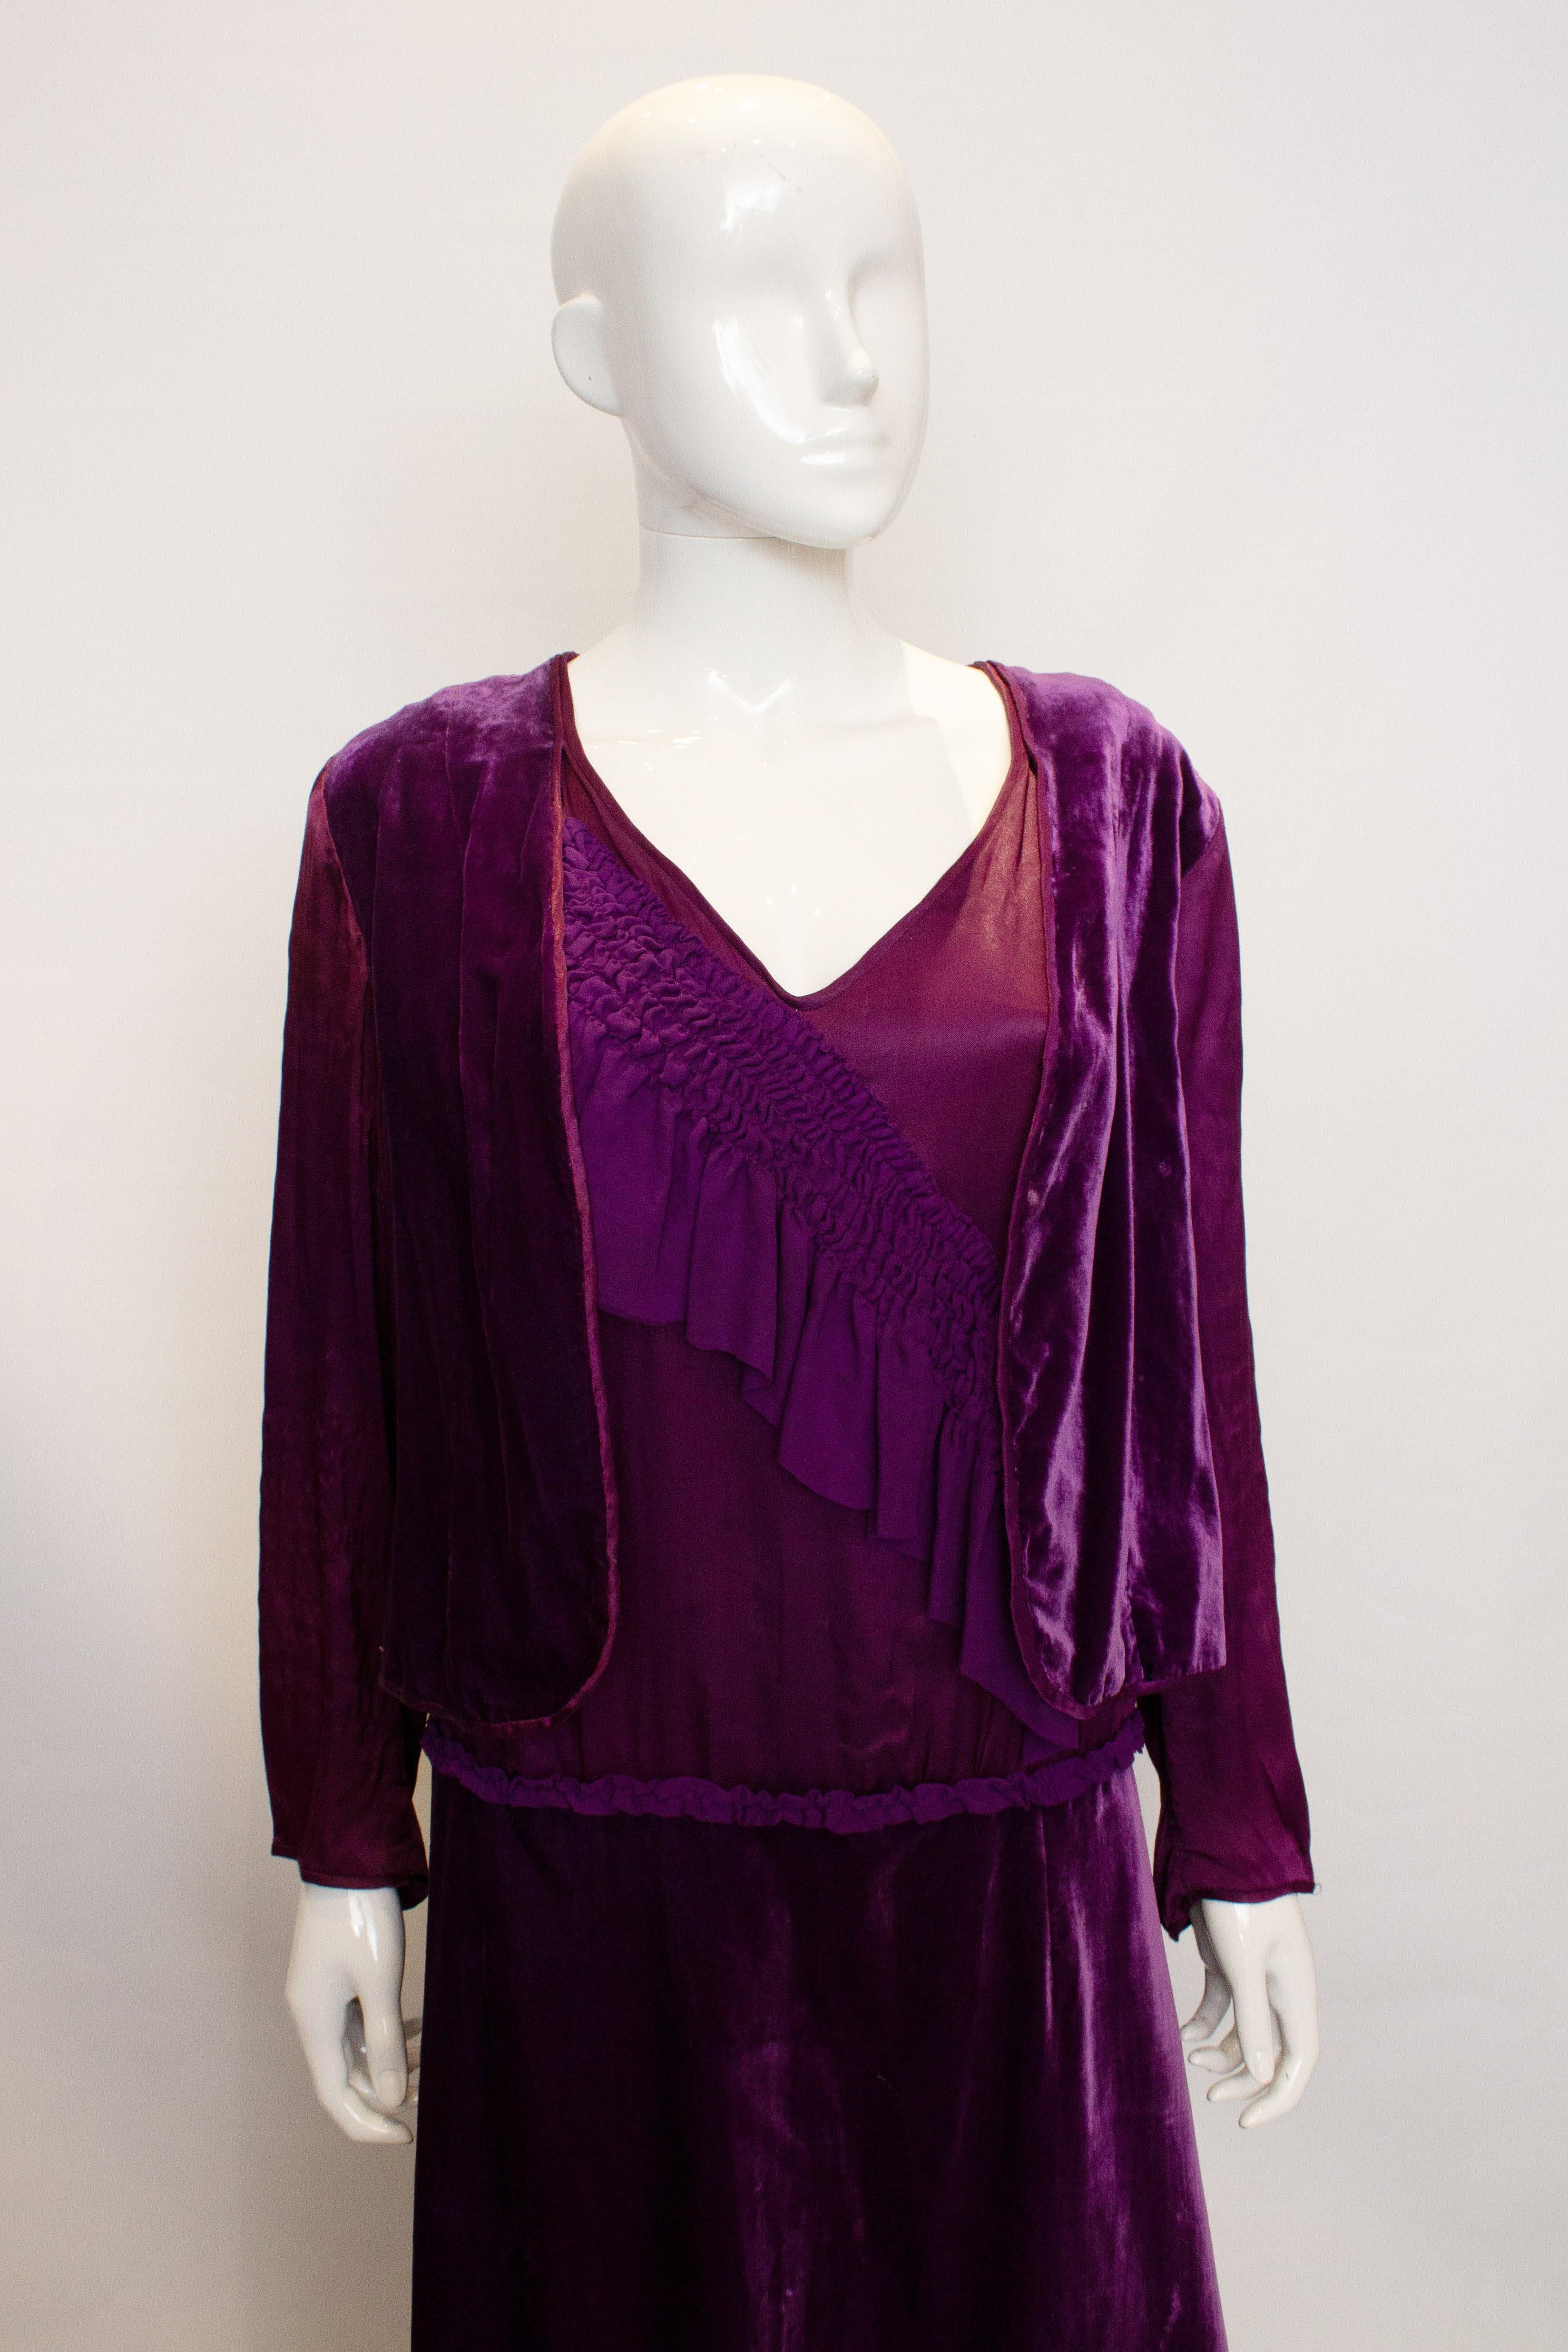 A stunning purple gown from the 1920s. The dress has a v neckline and silk gathering at the front. It has satin sleaves and frill detail at the back. 
